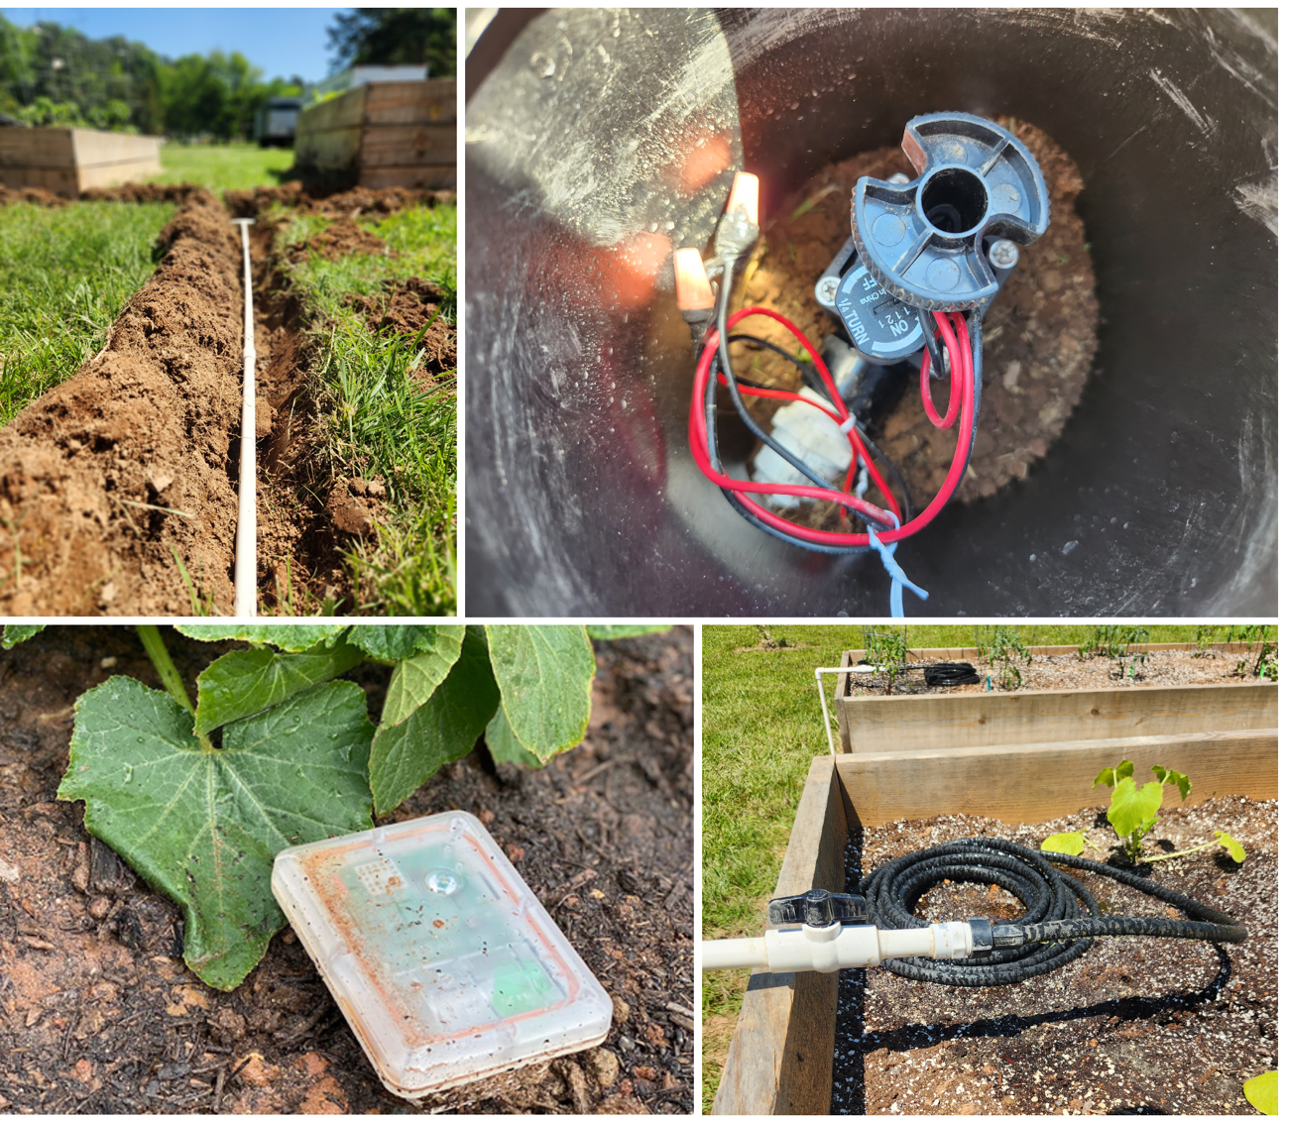 implementing the iot solution in the garden